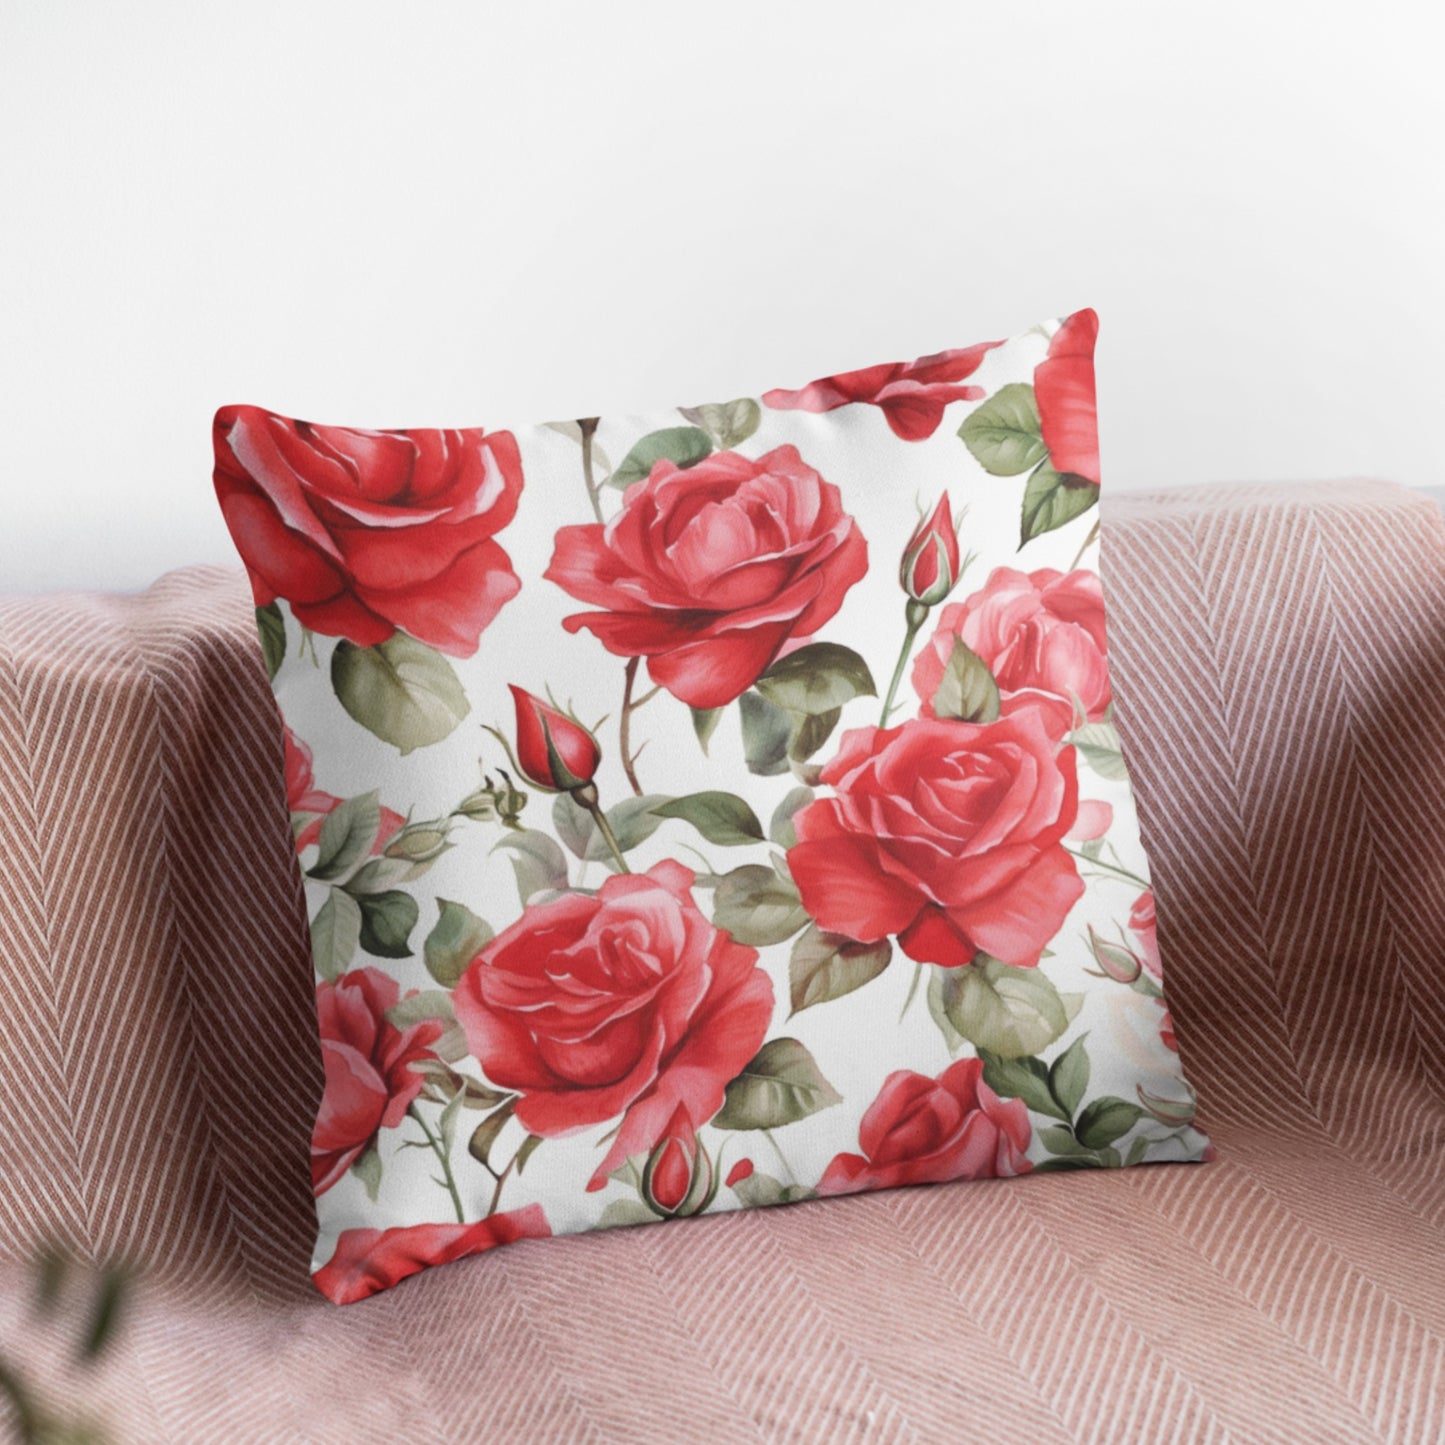 Stylish Red Rose Pillow